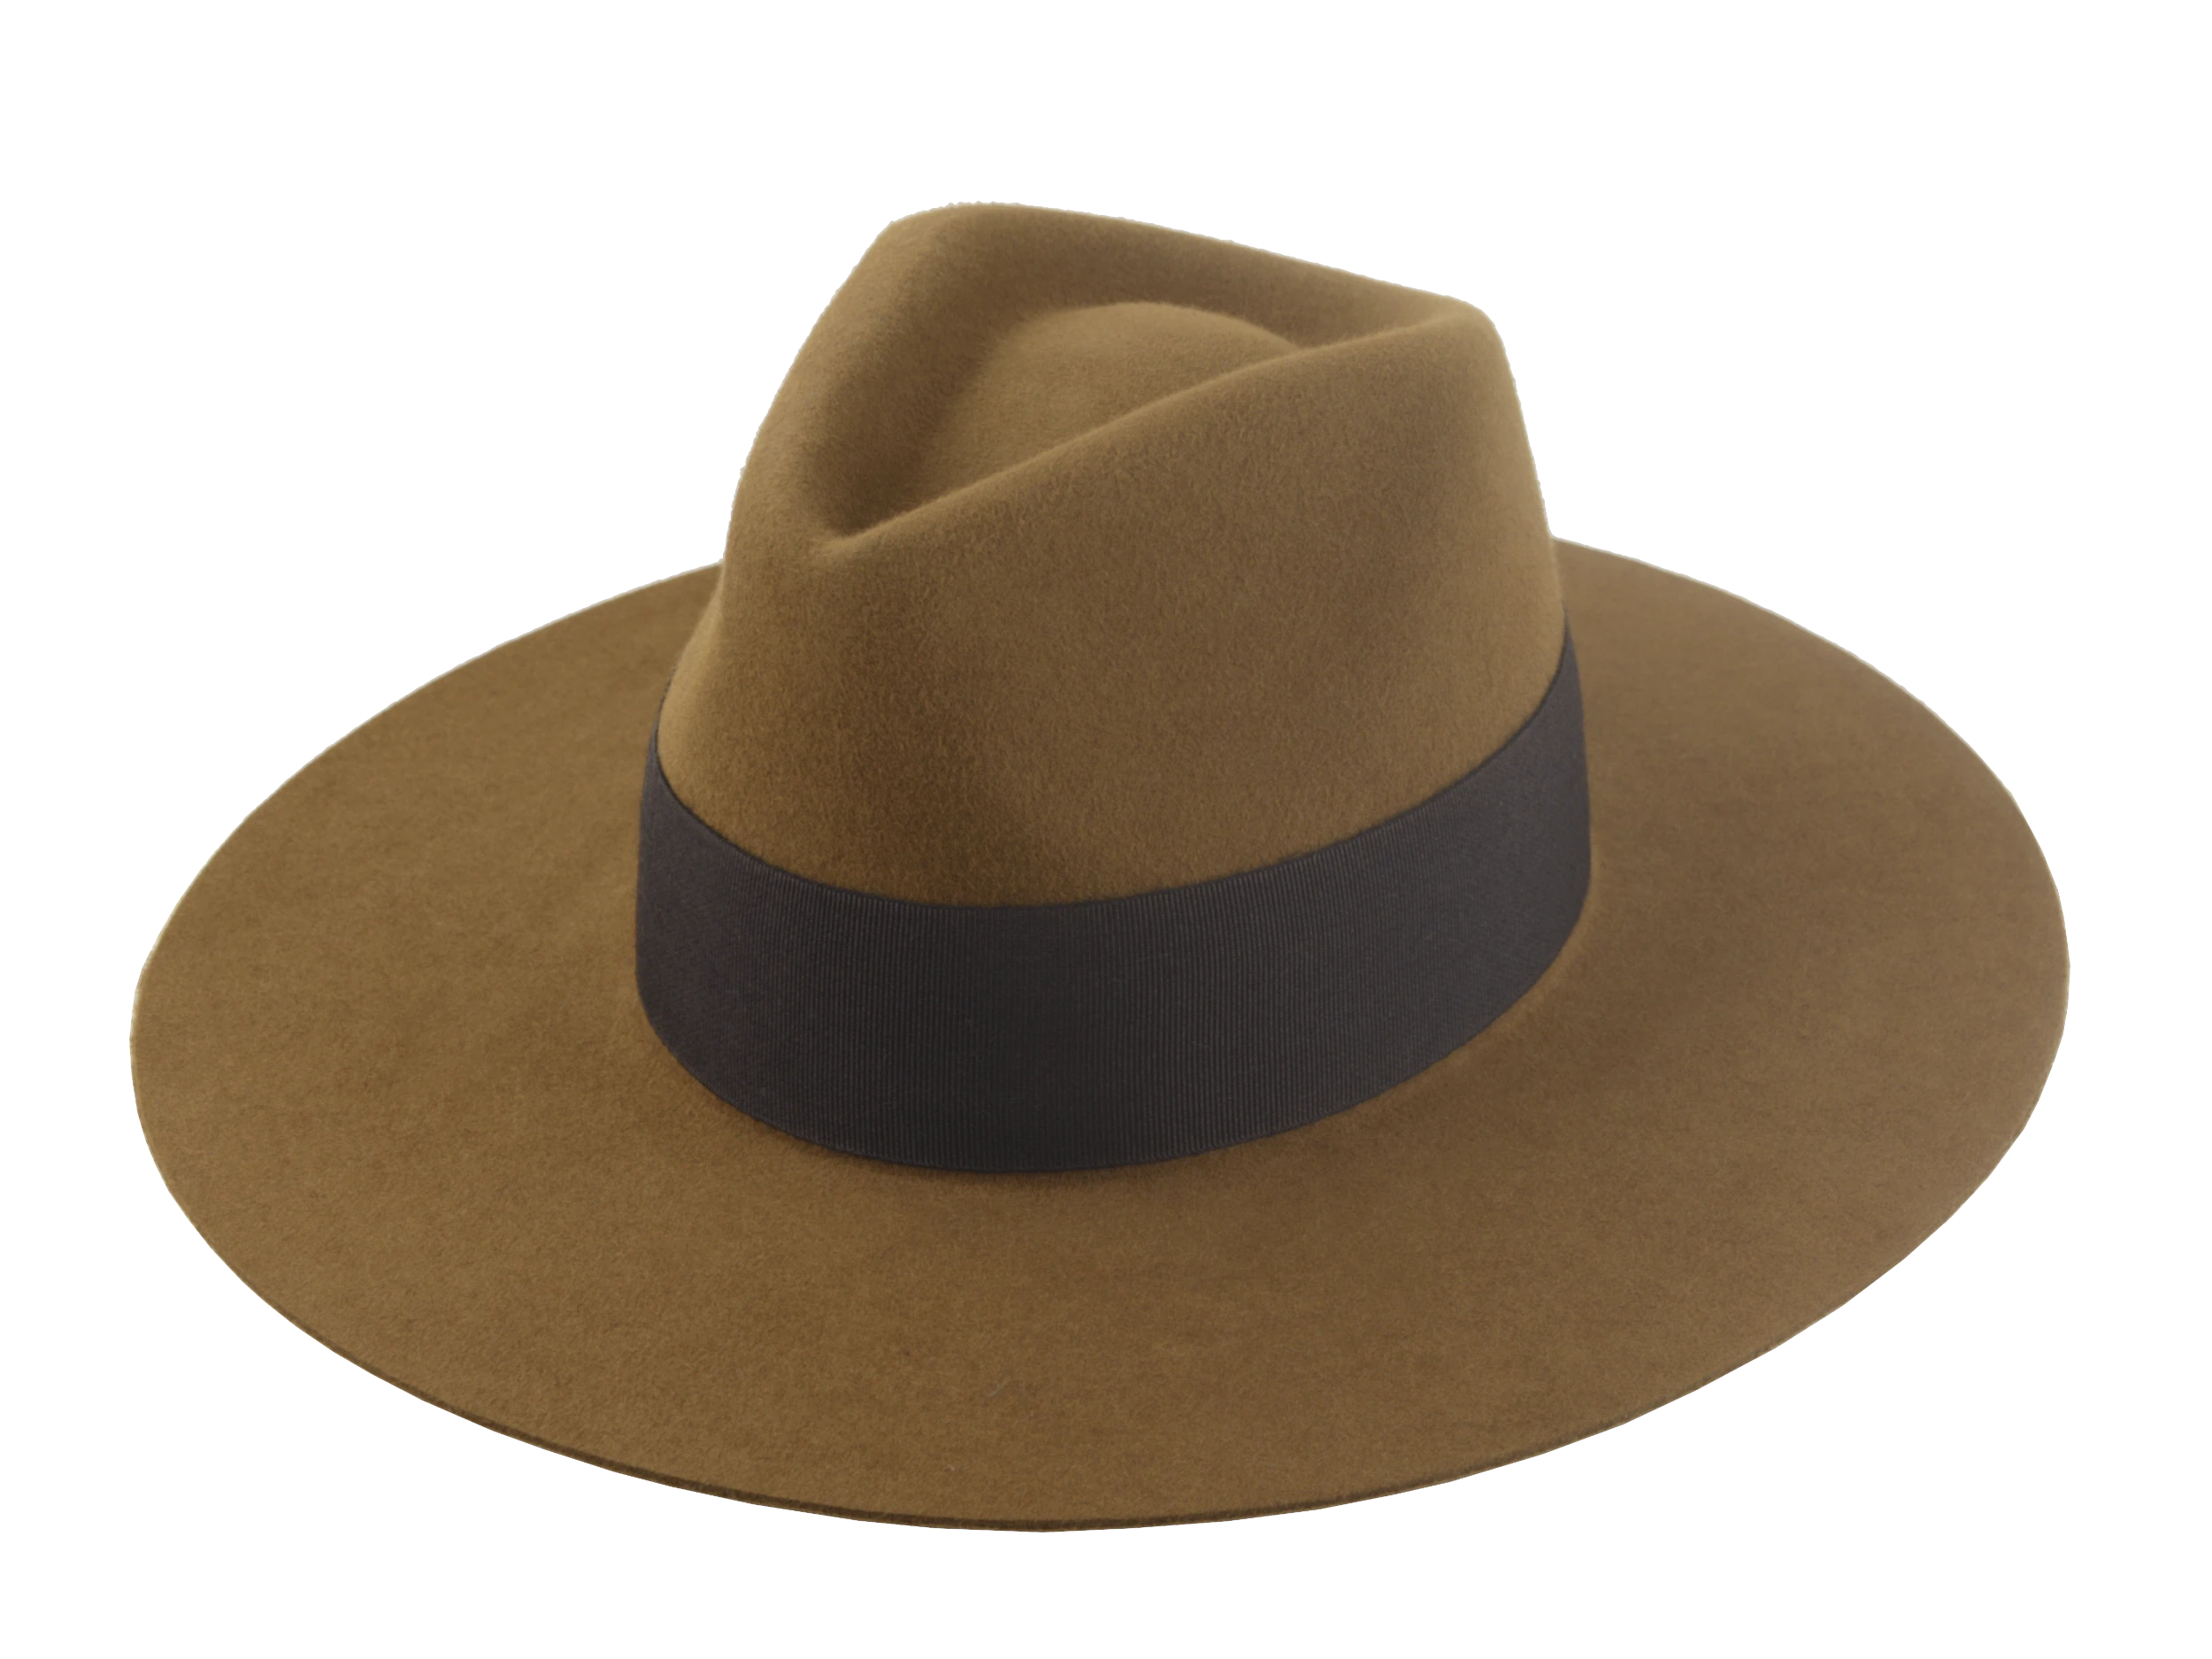 The Prairie: Showcasing the hat's versatility and style without a background | Agnoulita Hats